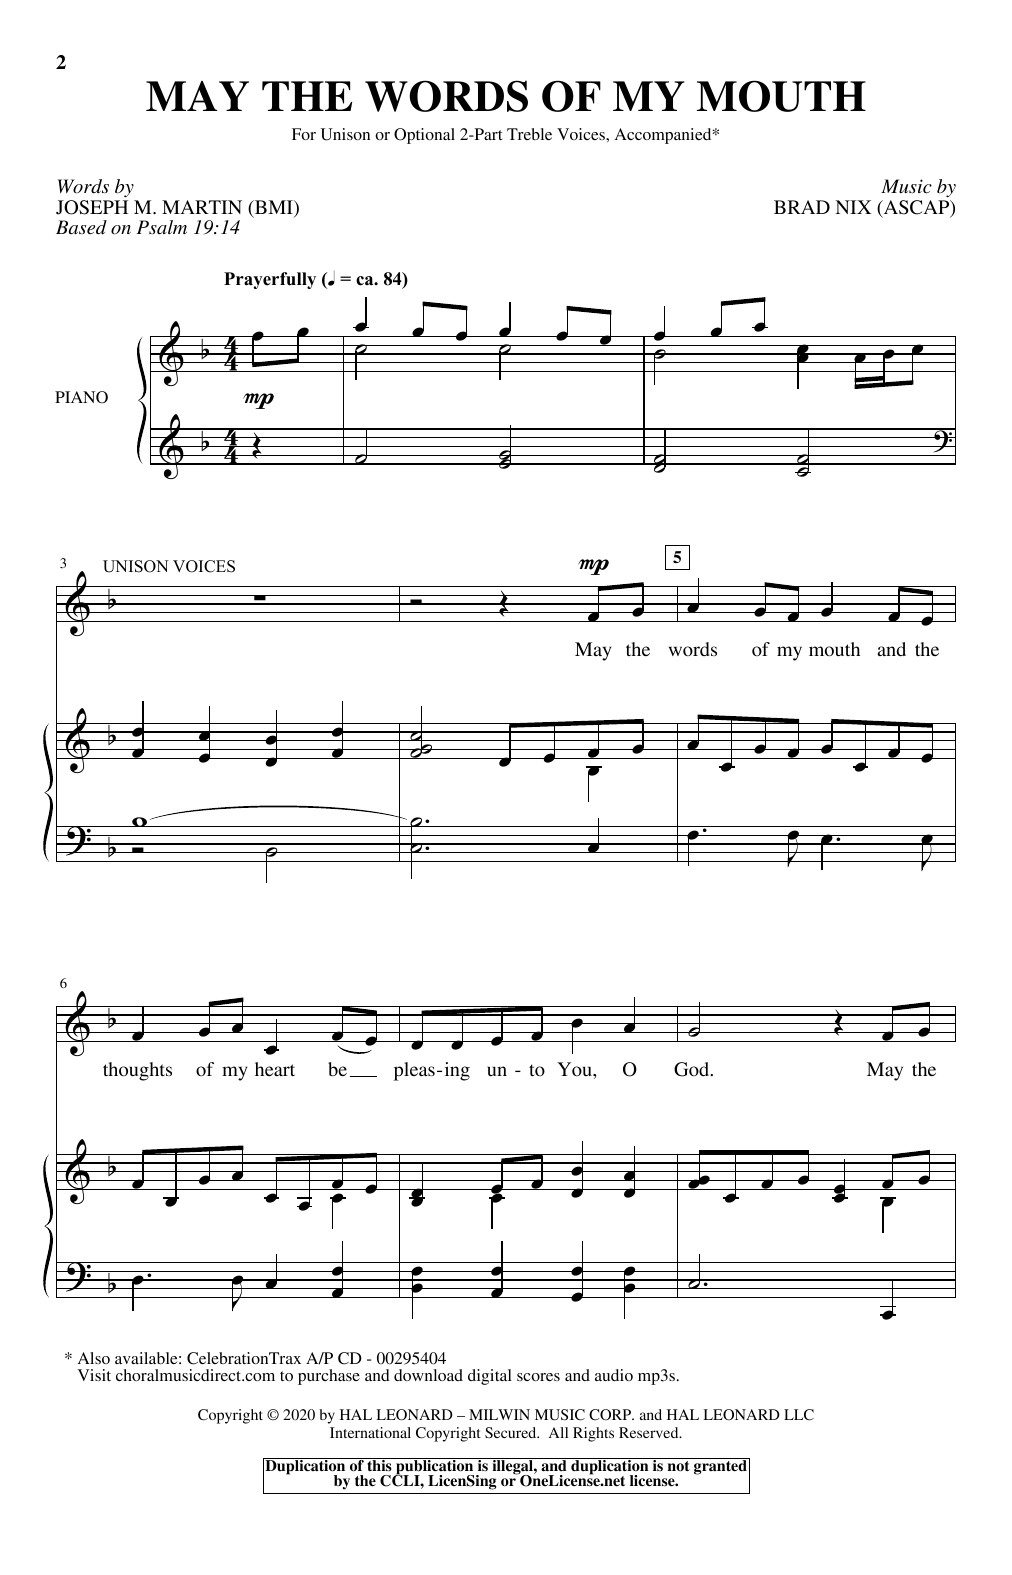 Download Joseph M. Martin and Brad Nix May The Words Of My Mouth Sheet Music